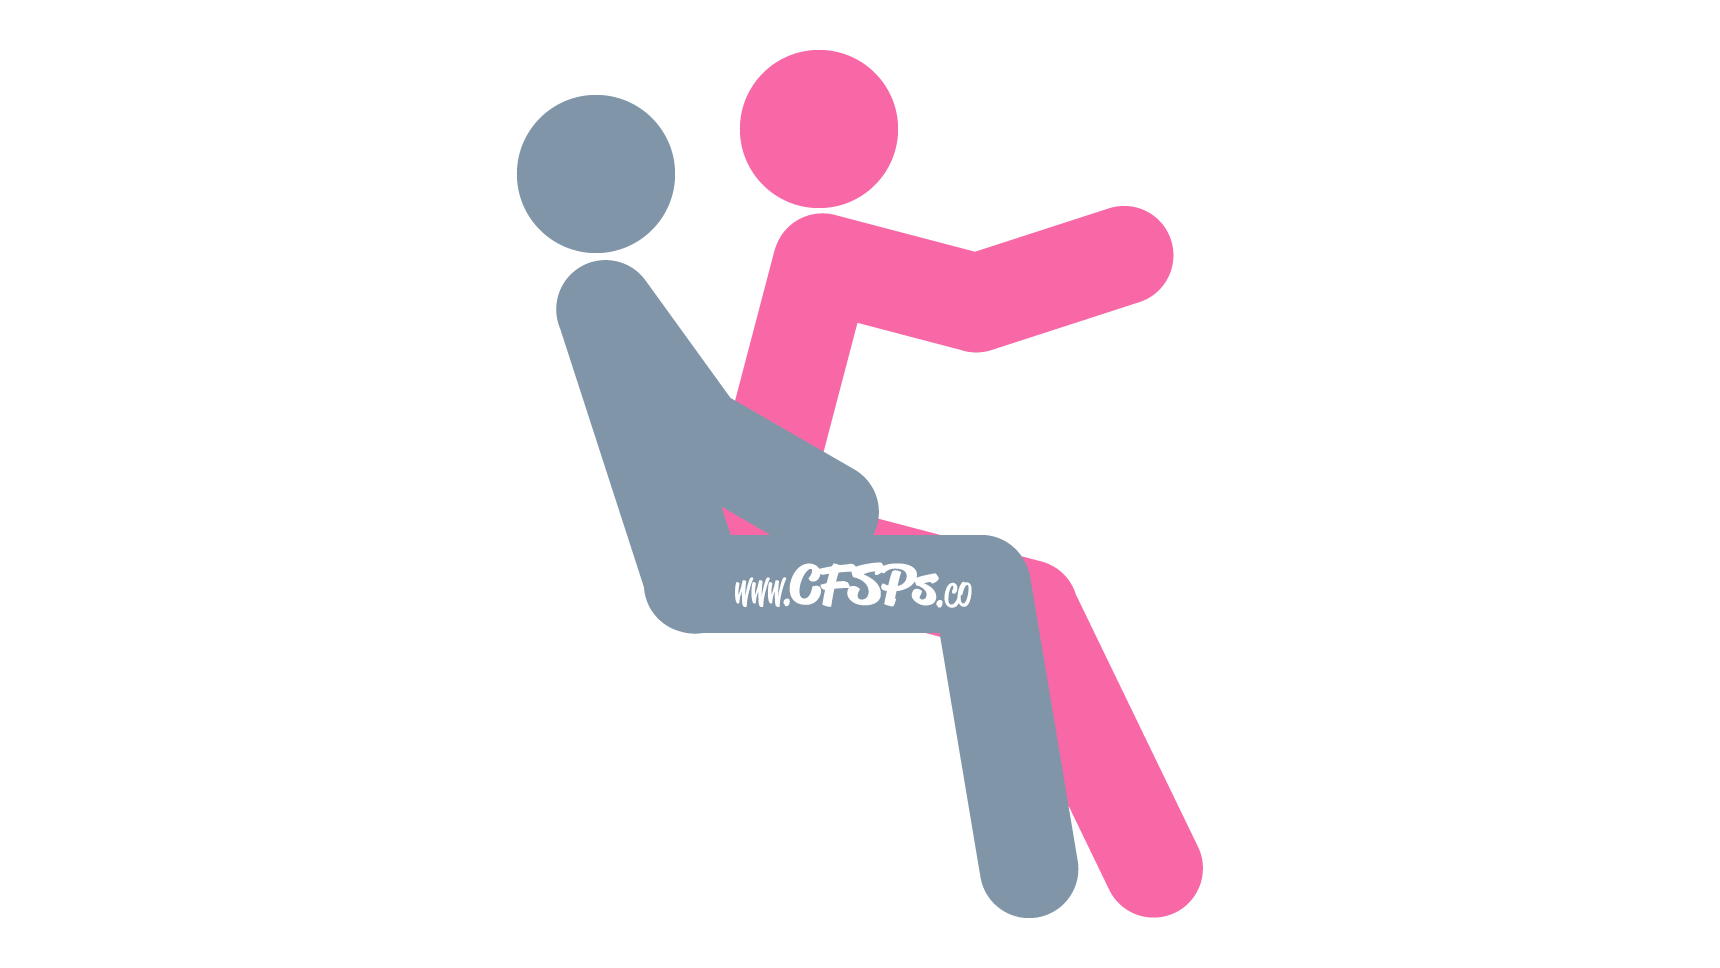 This stick figure image depicts a man and woman having sex in the Backseat Driver sex position. The man is sitting with his legs closed in the backseat of a vehicle. The woman is sitting on his lap with her back facing him and holding onto the car seat in front of her.